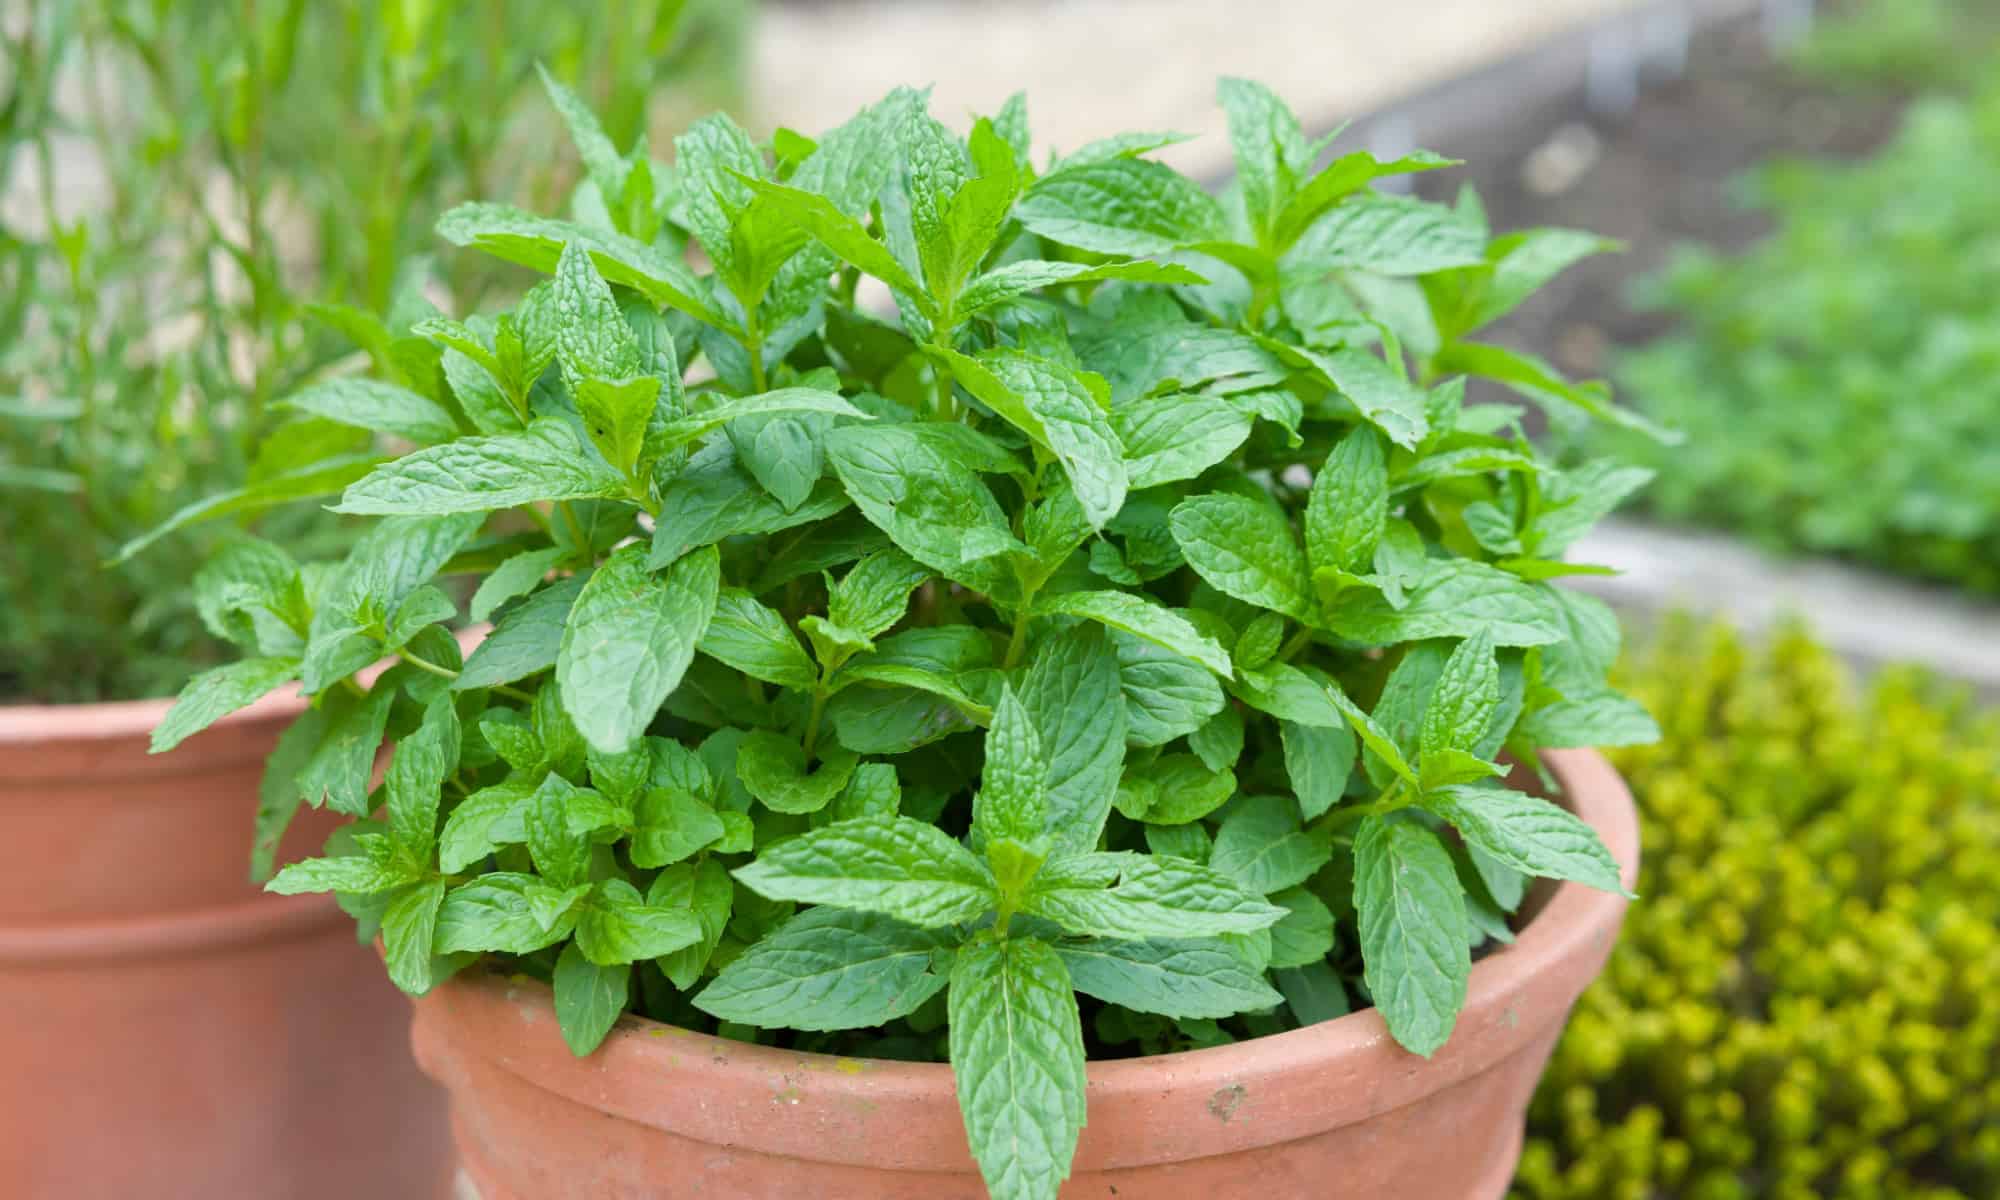 Mint leaves - Health Benefits, Uses and Important Facts